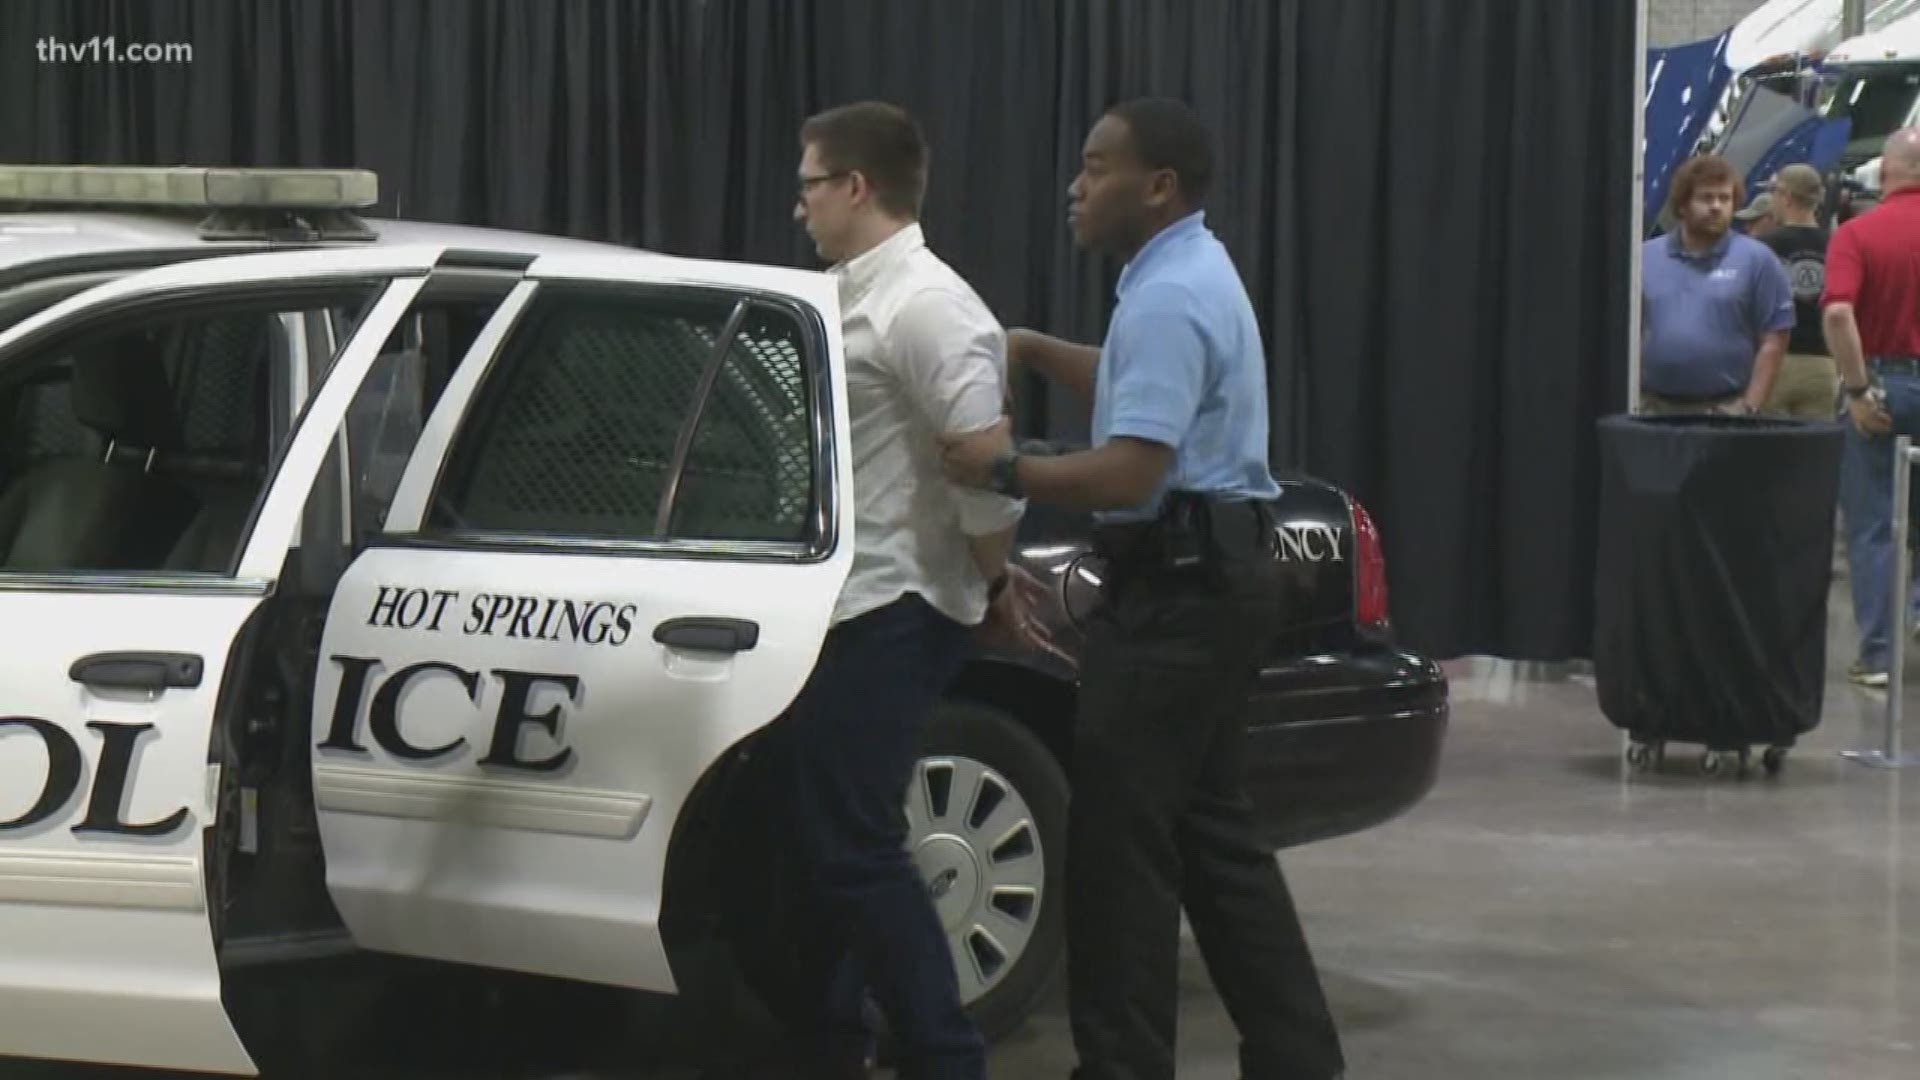 A national competition is helping staff the Little Rock Police Department.